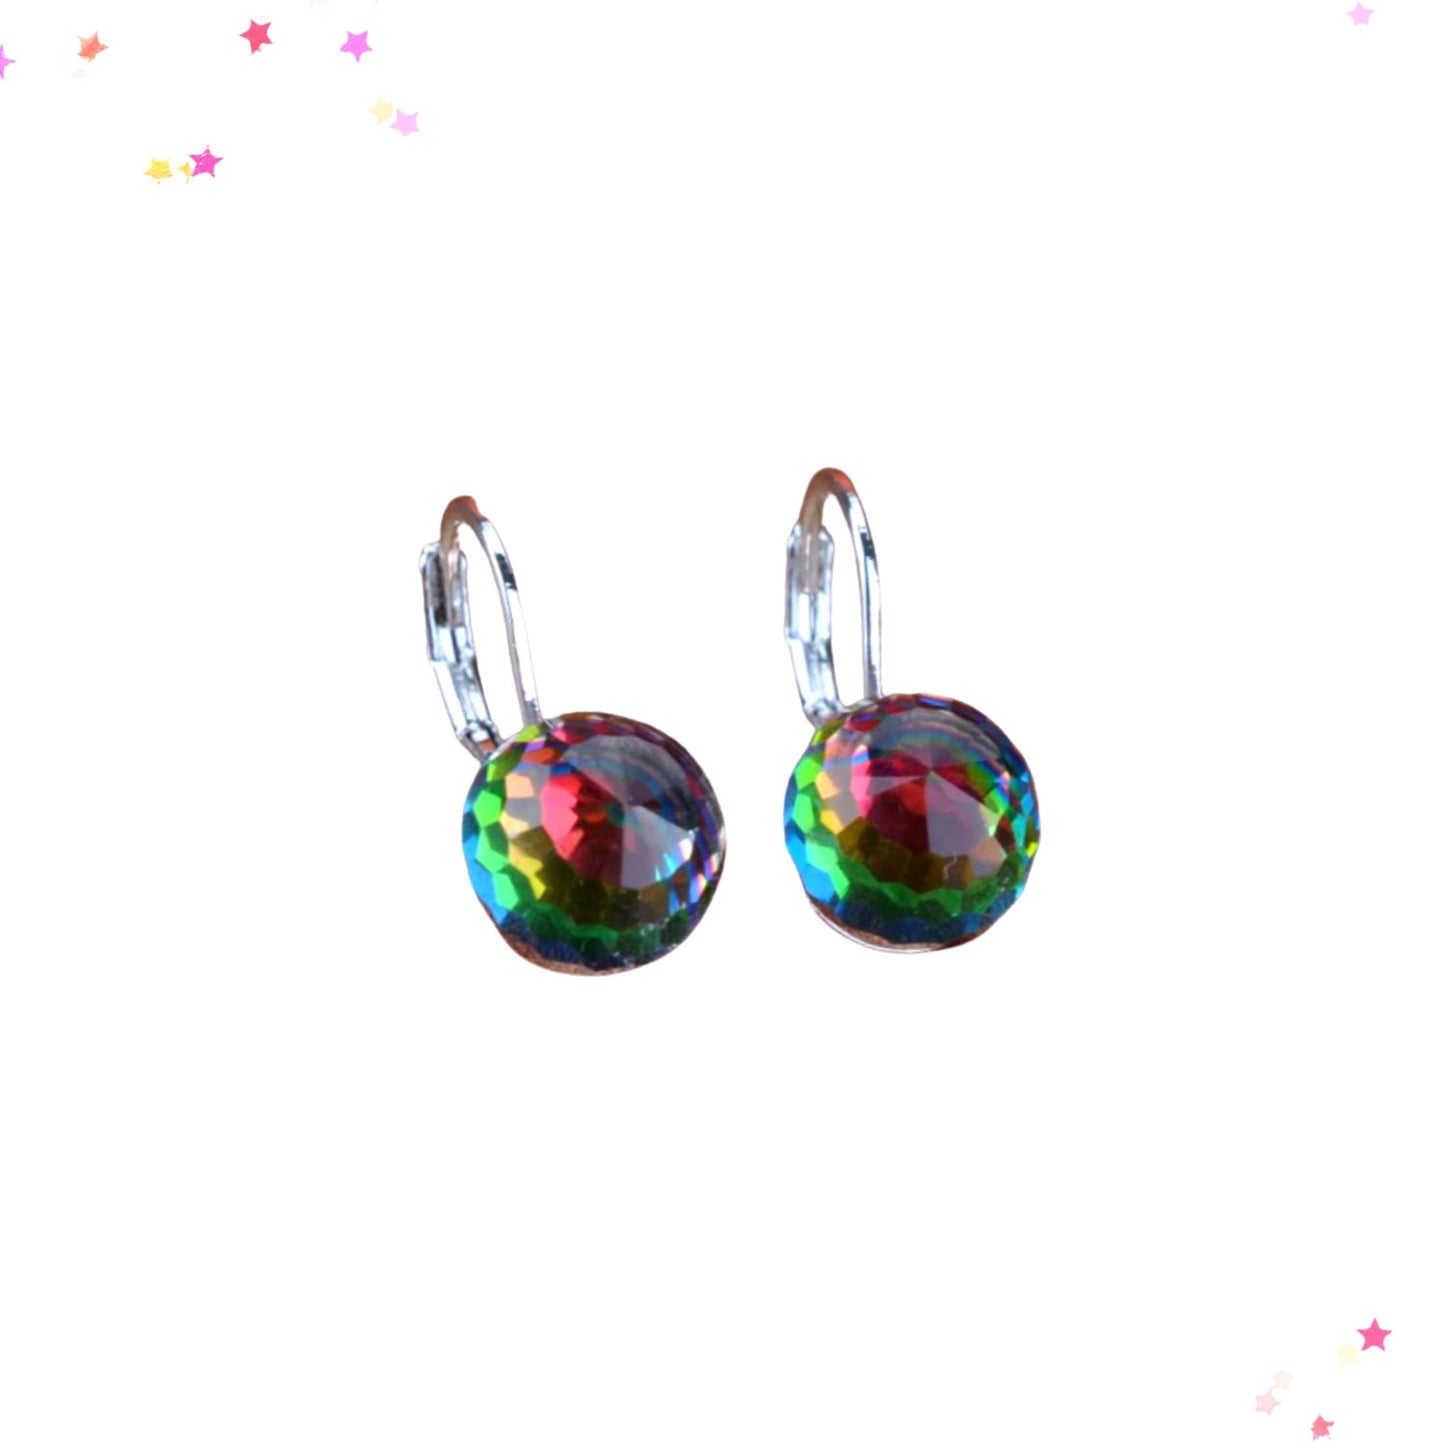 Retro Crystal Ball Prism Earrings from Confetti Kitty, Only 7.99